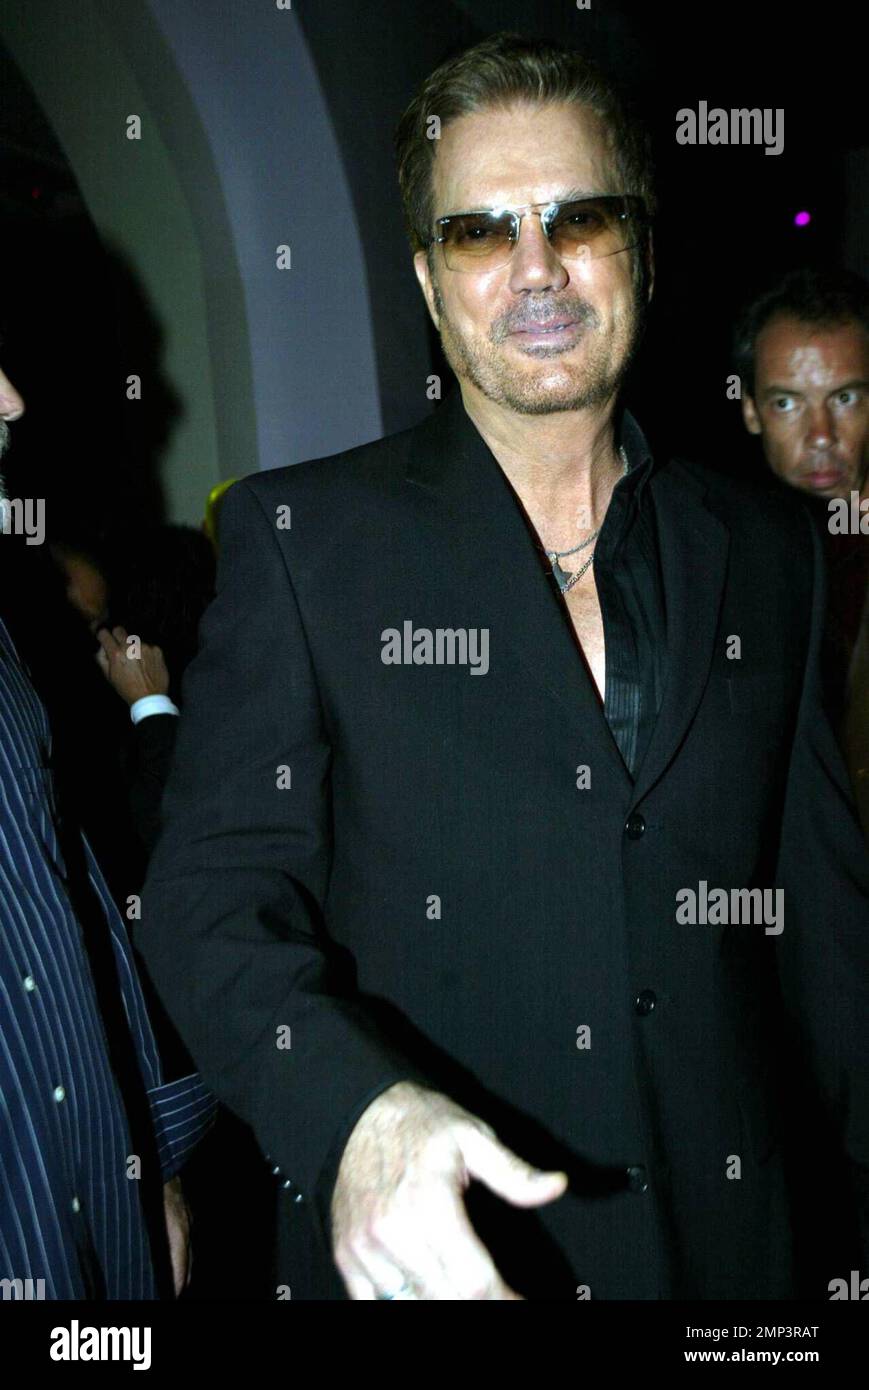 Exclusive!! Cuban singer Willy Chirino attends the release party for his new CD 'Pa' Lante' at Gem nightclub sponsored by 'Ocean Drive Espanol' and Cabana Cachasa Mojitos and Spirits. Miami, FL 6/6/08. Stock Photo